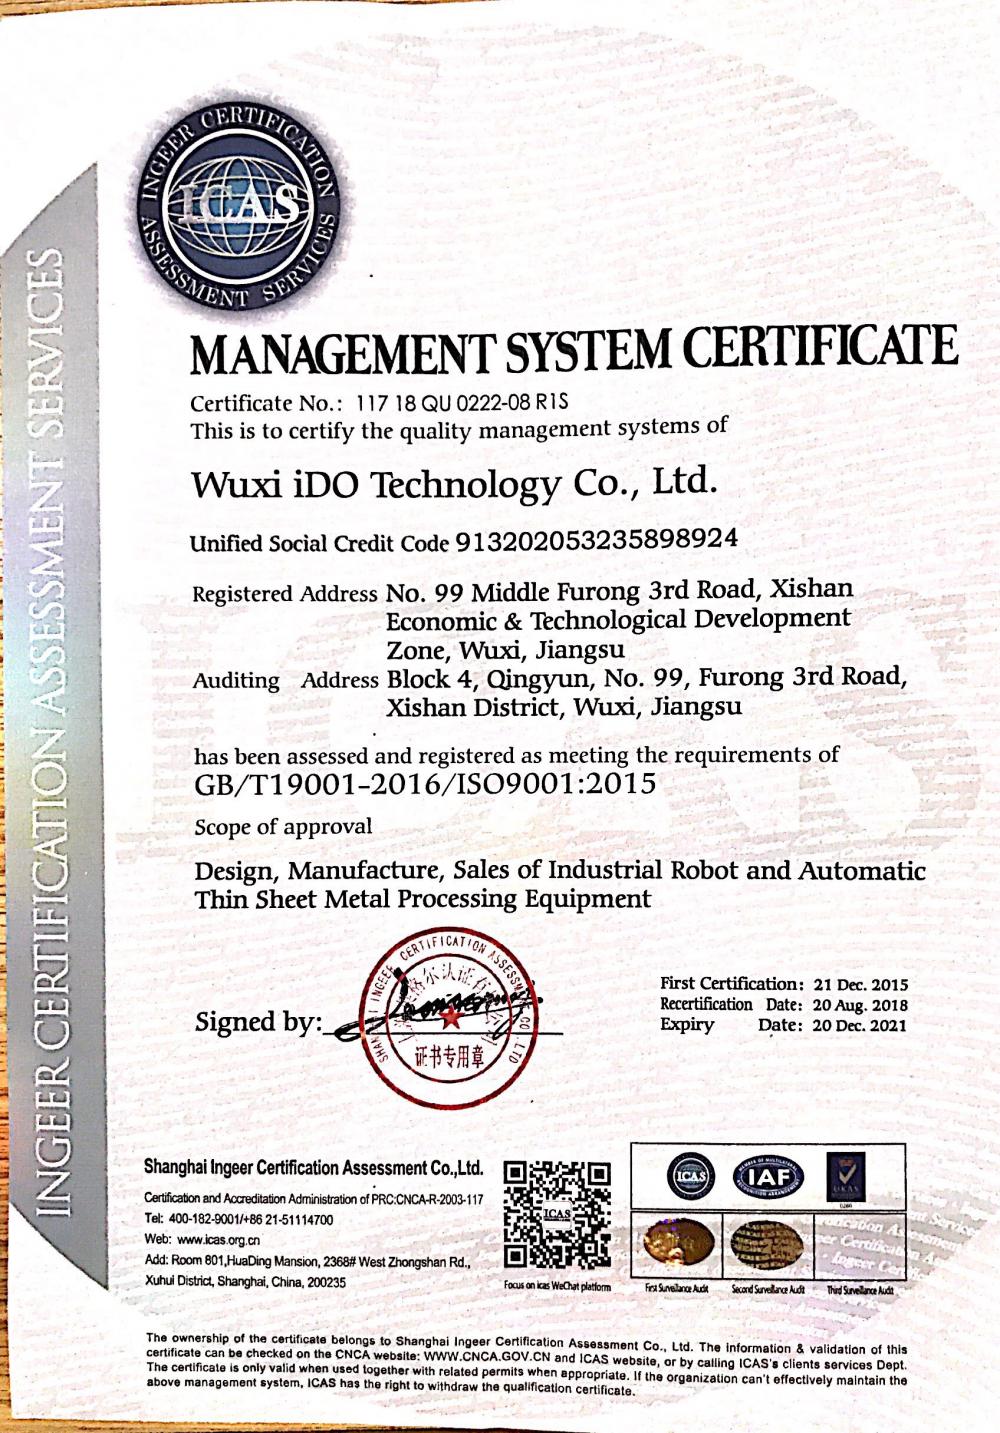 IDO Management System Certificate